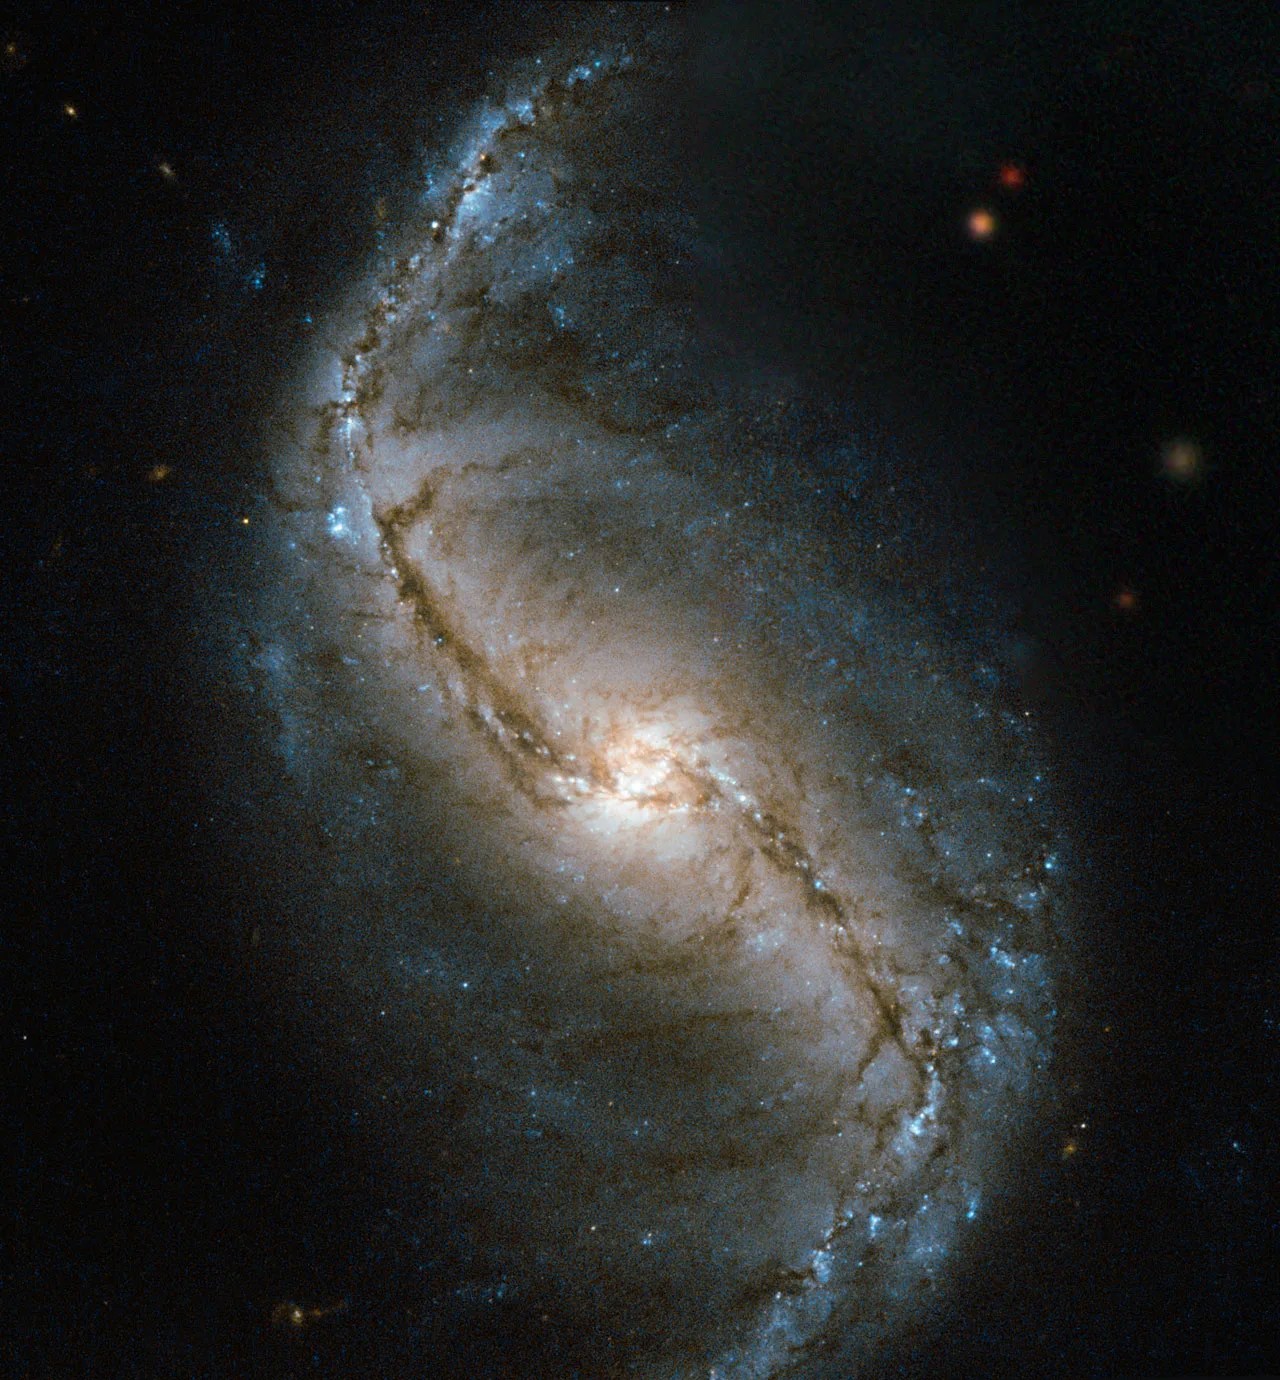 Galaxy with golden center and barred swirling arms streaked with dark dust lanes.